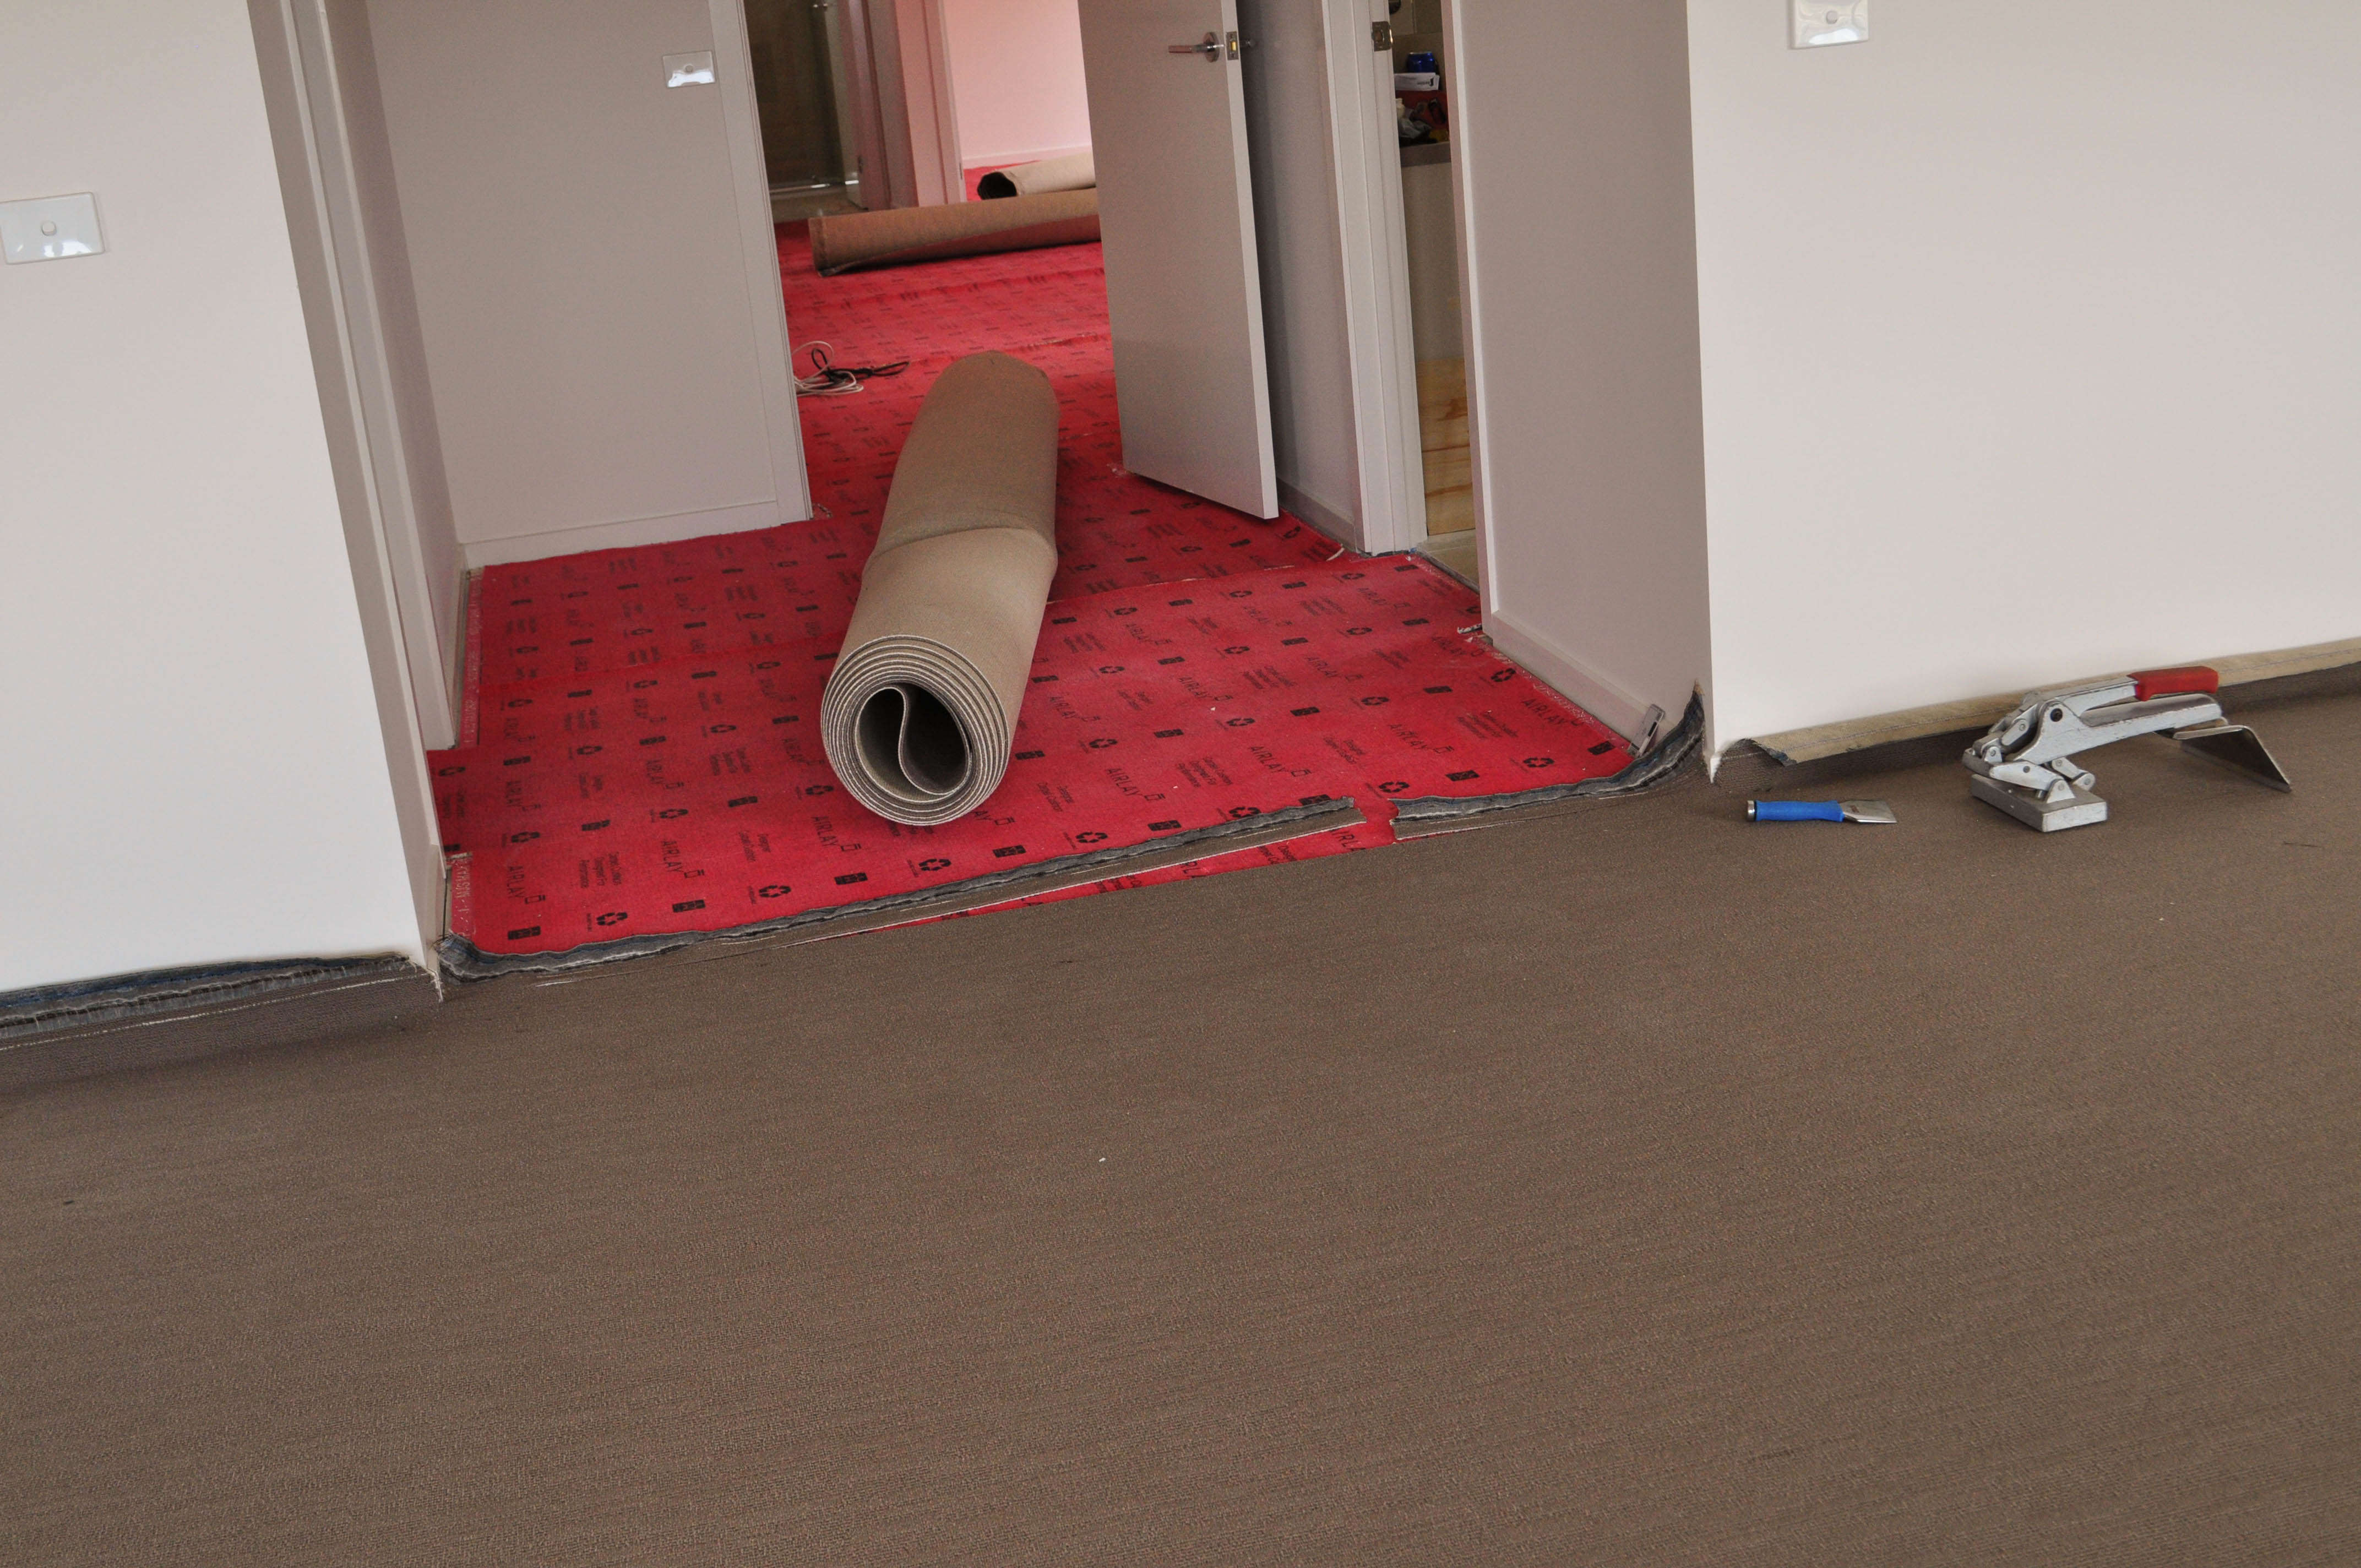 carpet laying process under way by Concord Floors, showing rolls of carpet, one stretched out, on top of installed red underlay in a home in
 Point Cook, Werribee.